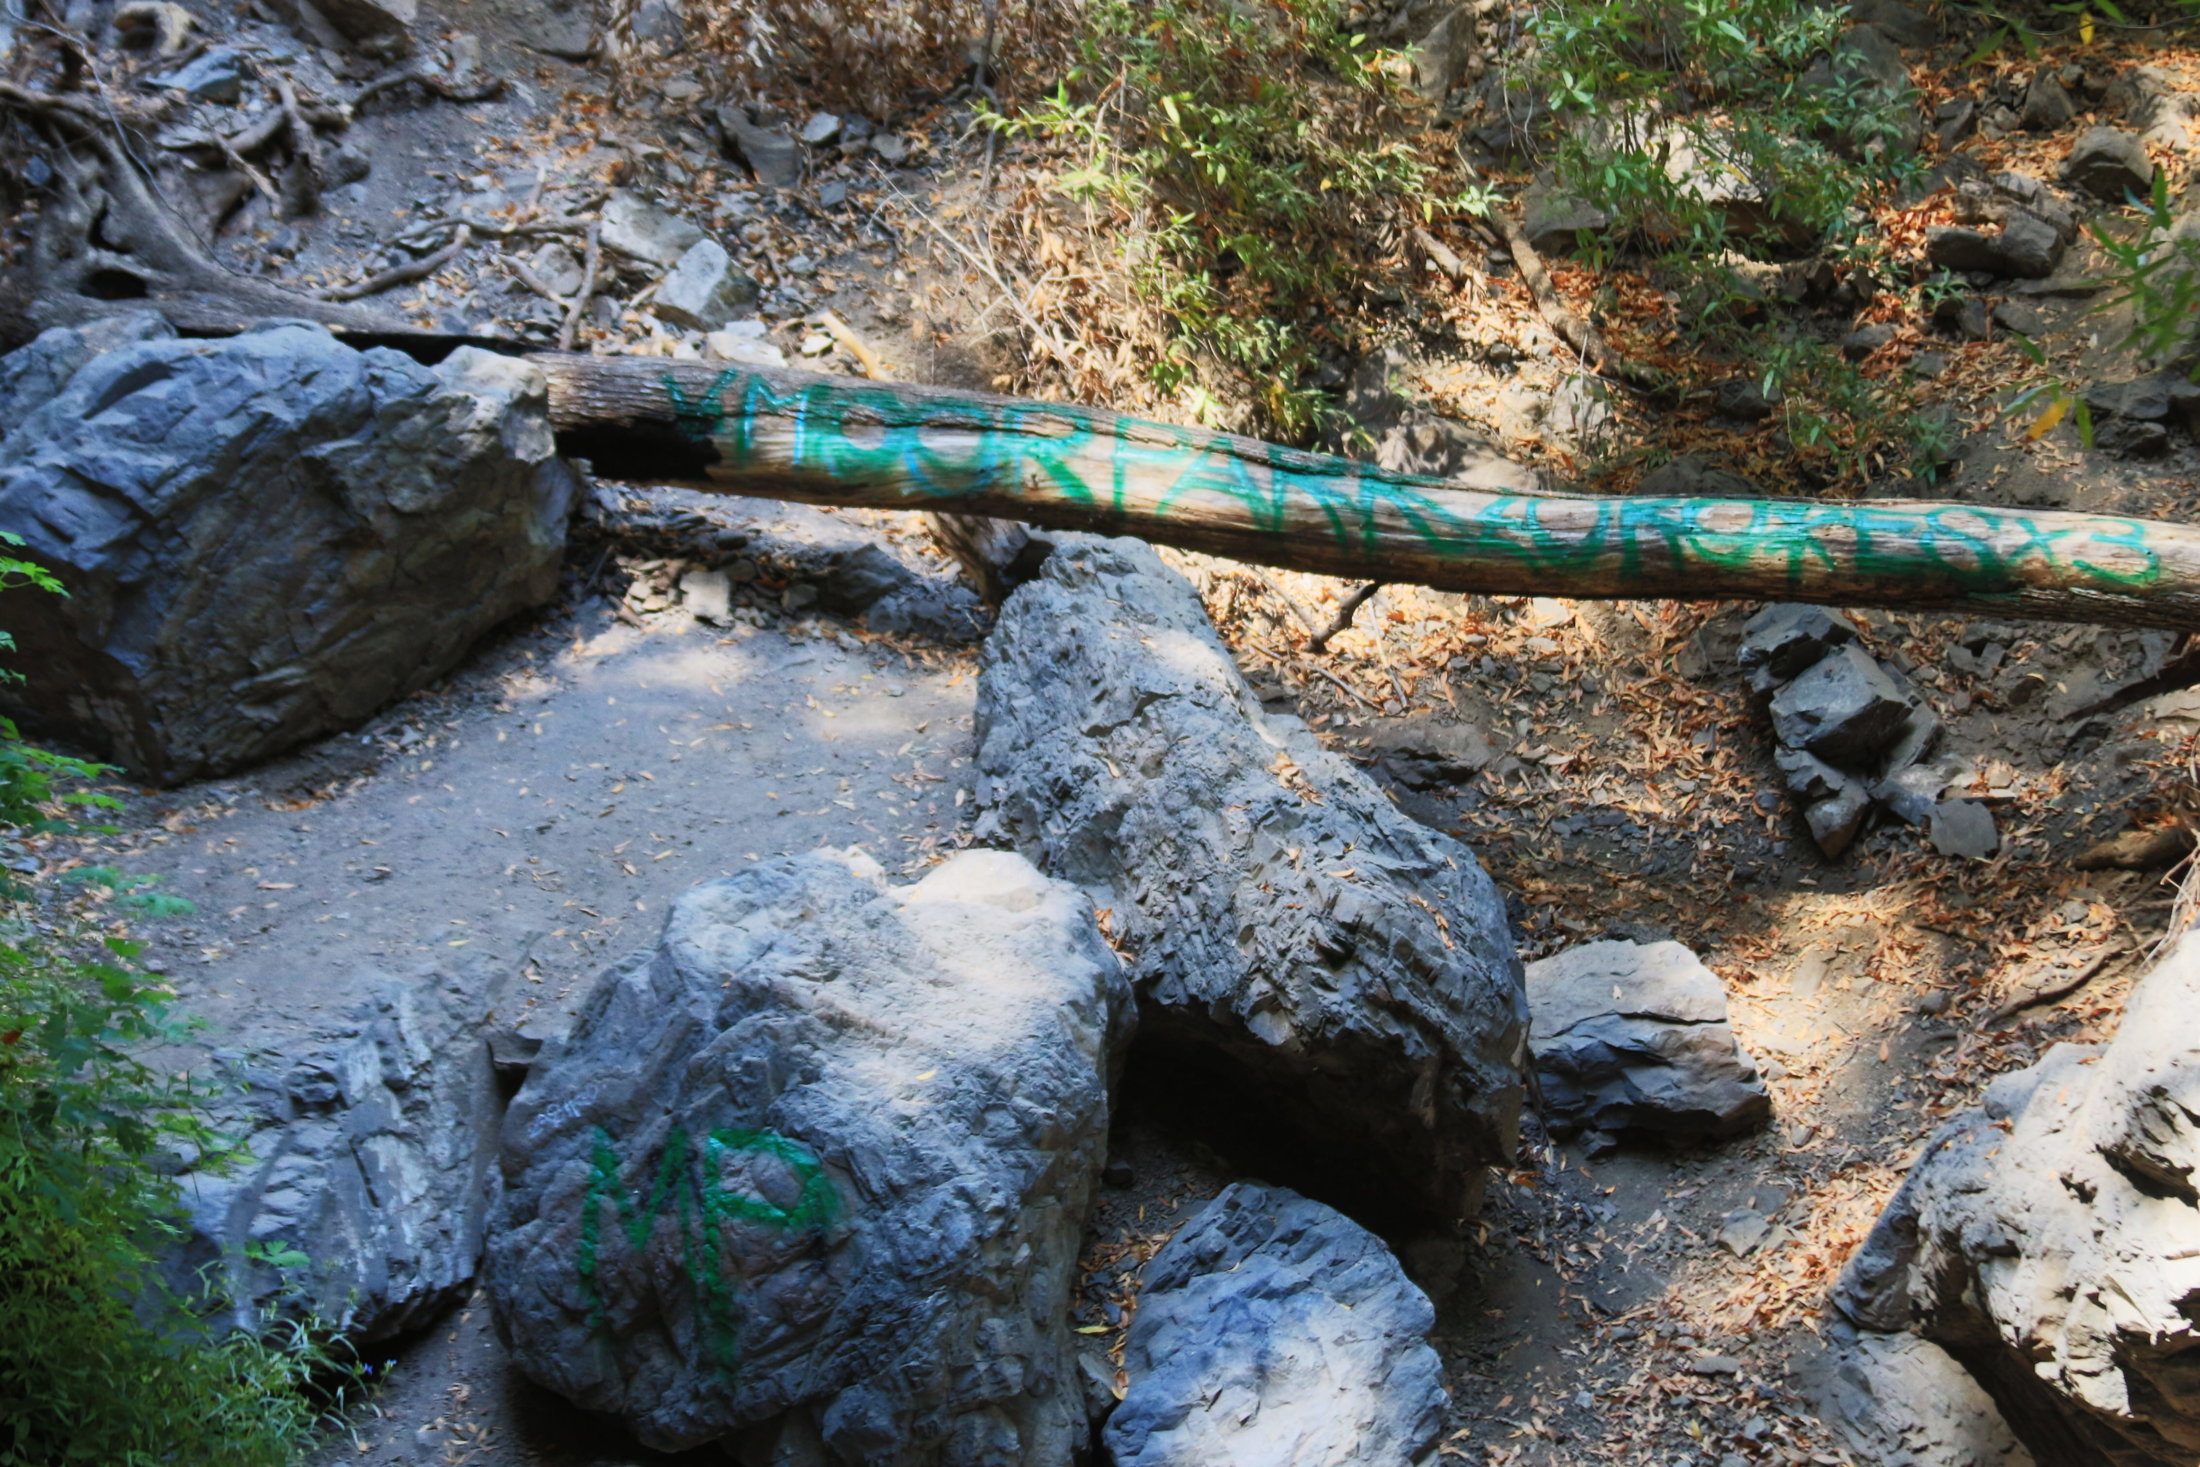 Graffiti in Los Padres national forest